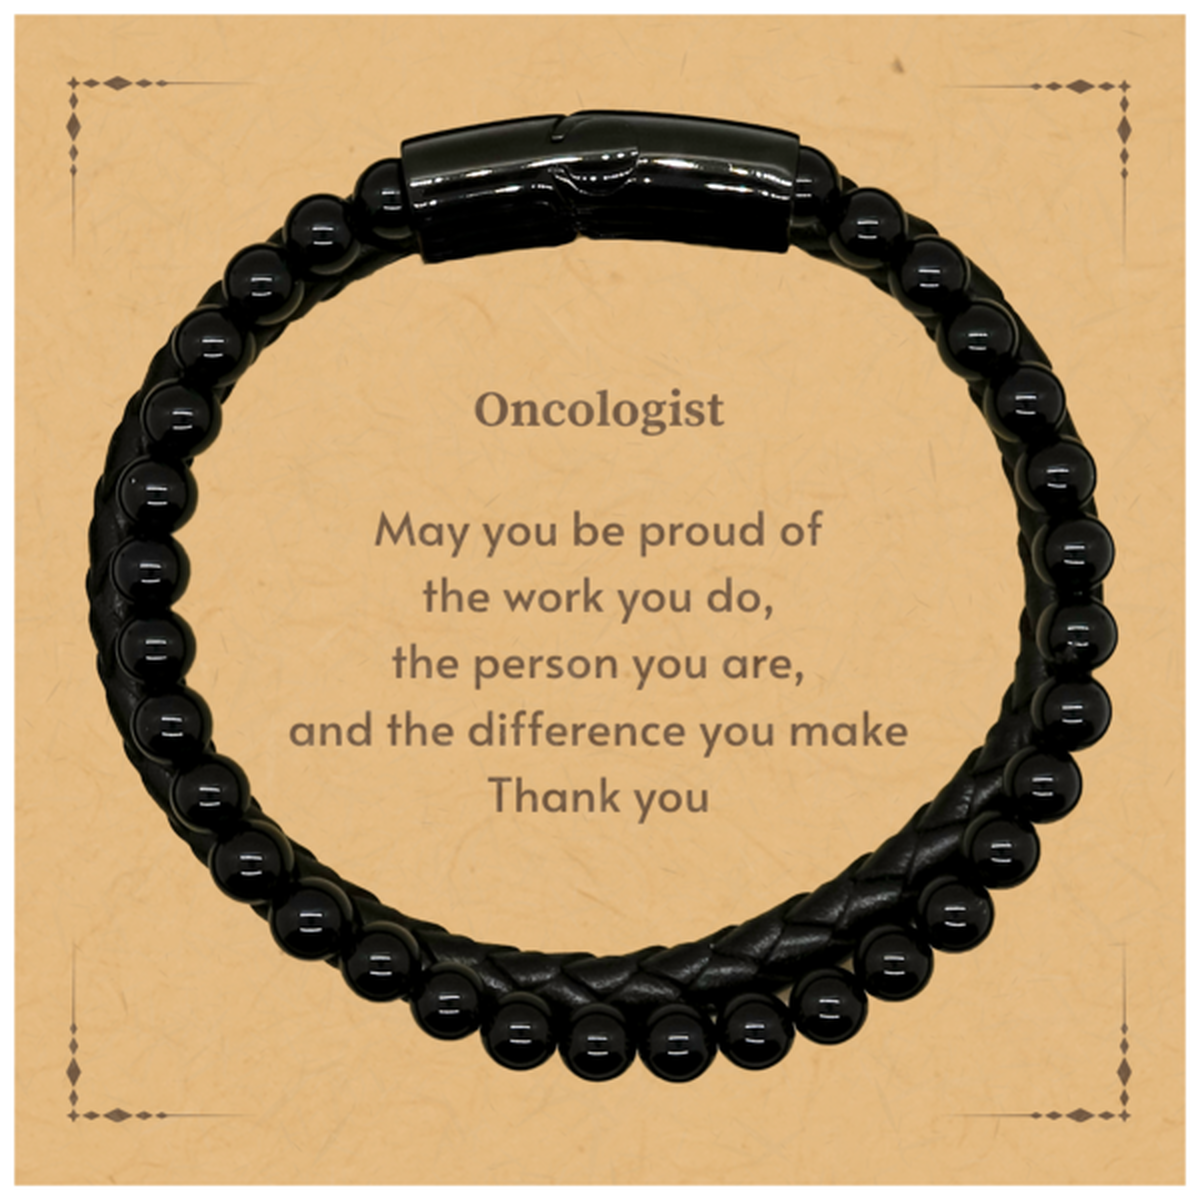 Heartwarming Stone Leather Bracelets Retirement Coworkers Gifts for Oncologist, Oncologist May You be proud of the work you do, the person you are Gifts for Boss Men Women Friends